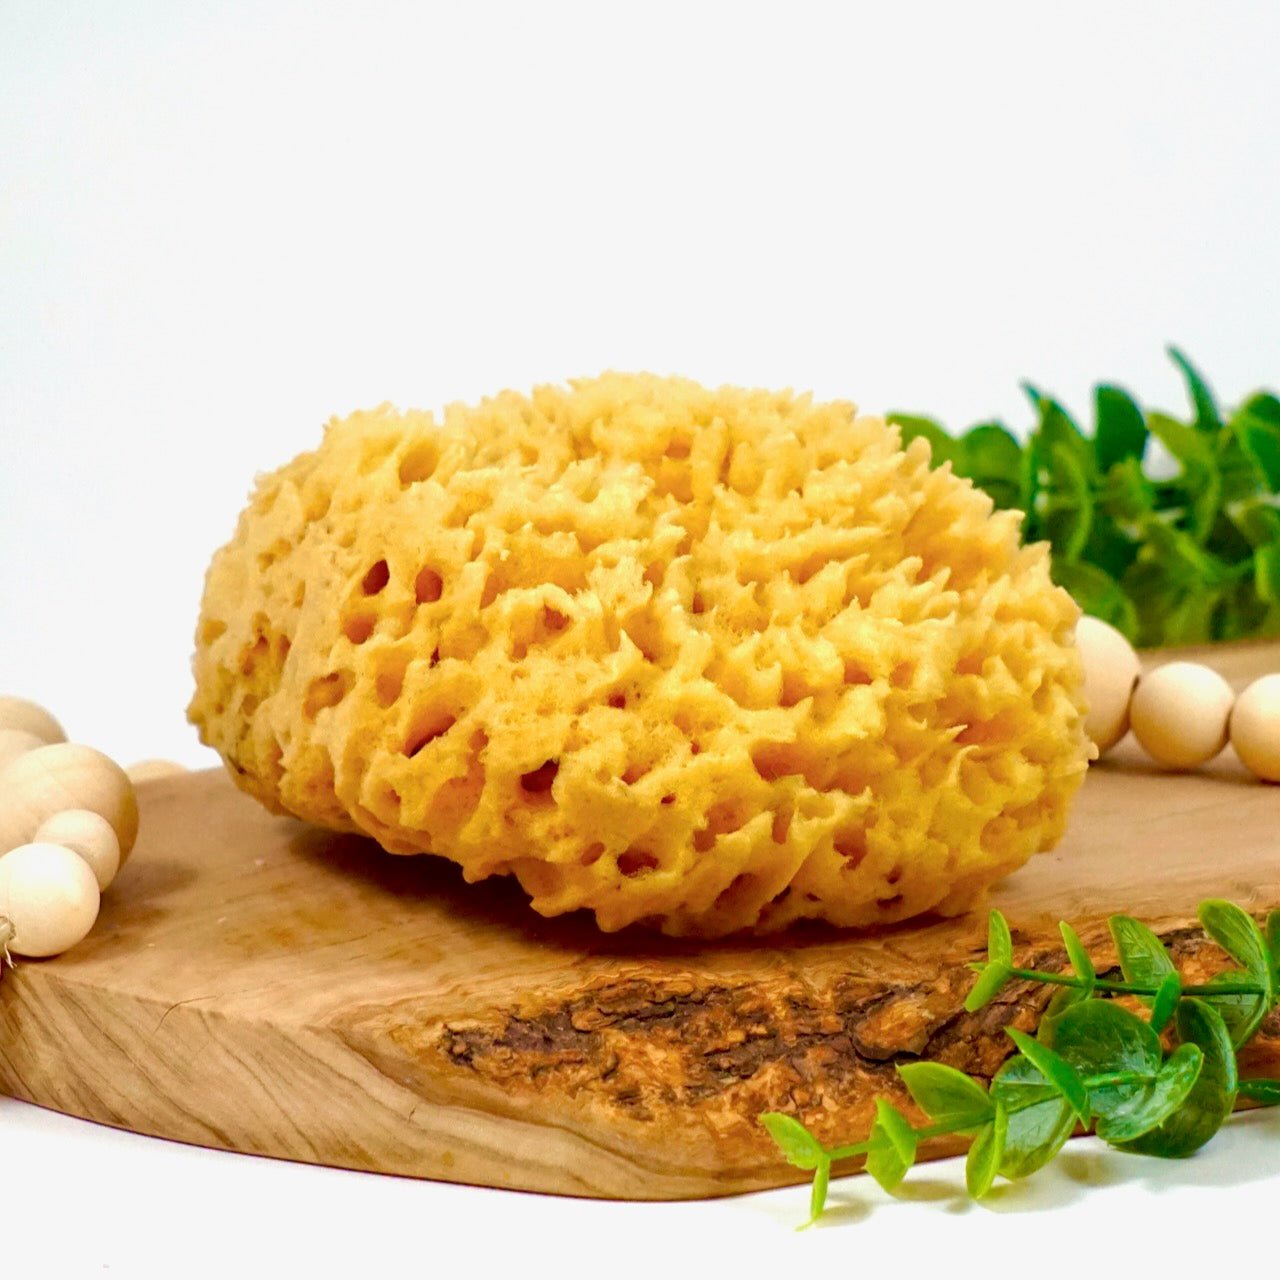 BULK 5pc SEA Sponge, 4-5 Size, Natural, Yellow, Bath, Cosmetic, Soap,  Natural & Sustainably Harvested, Free USA Ship, Two Wild Hares